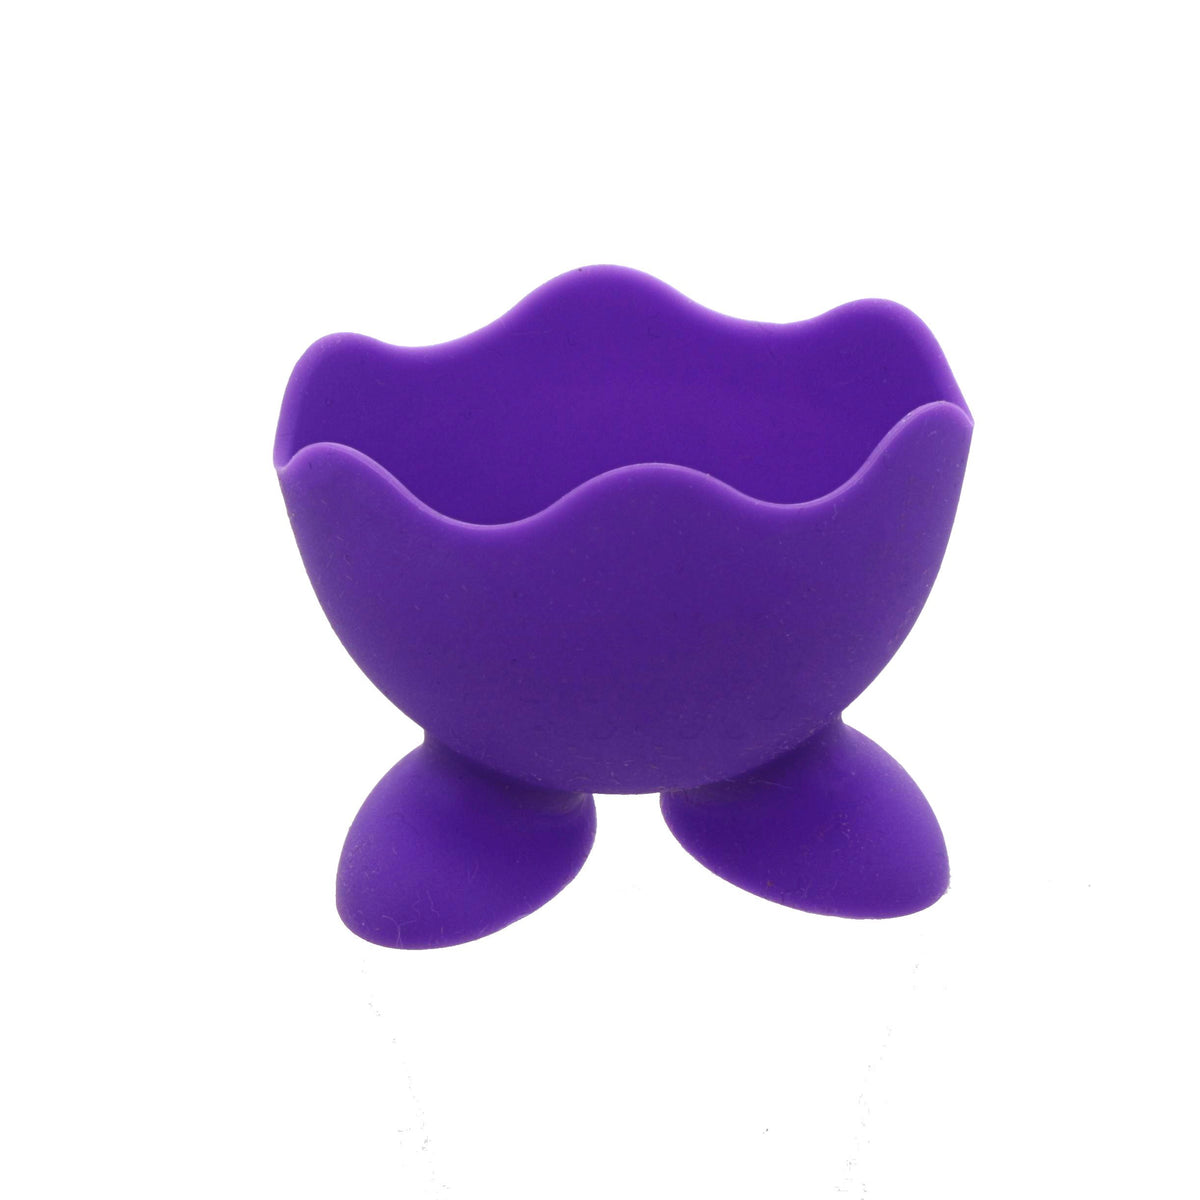 Purple Silicone Egg Cups - Set of 3